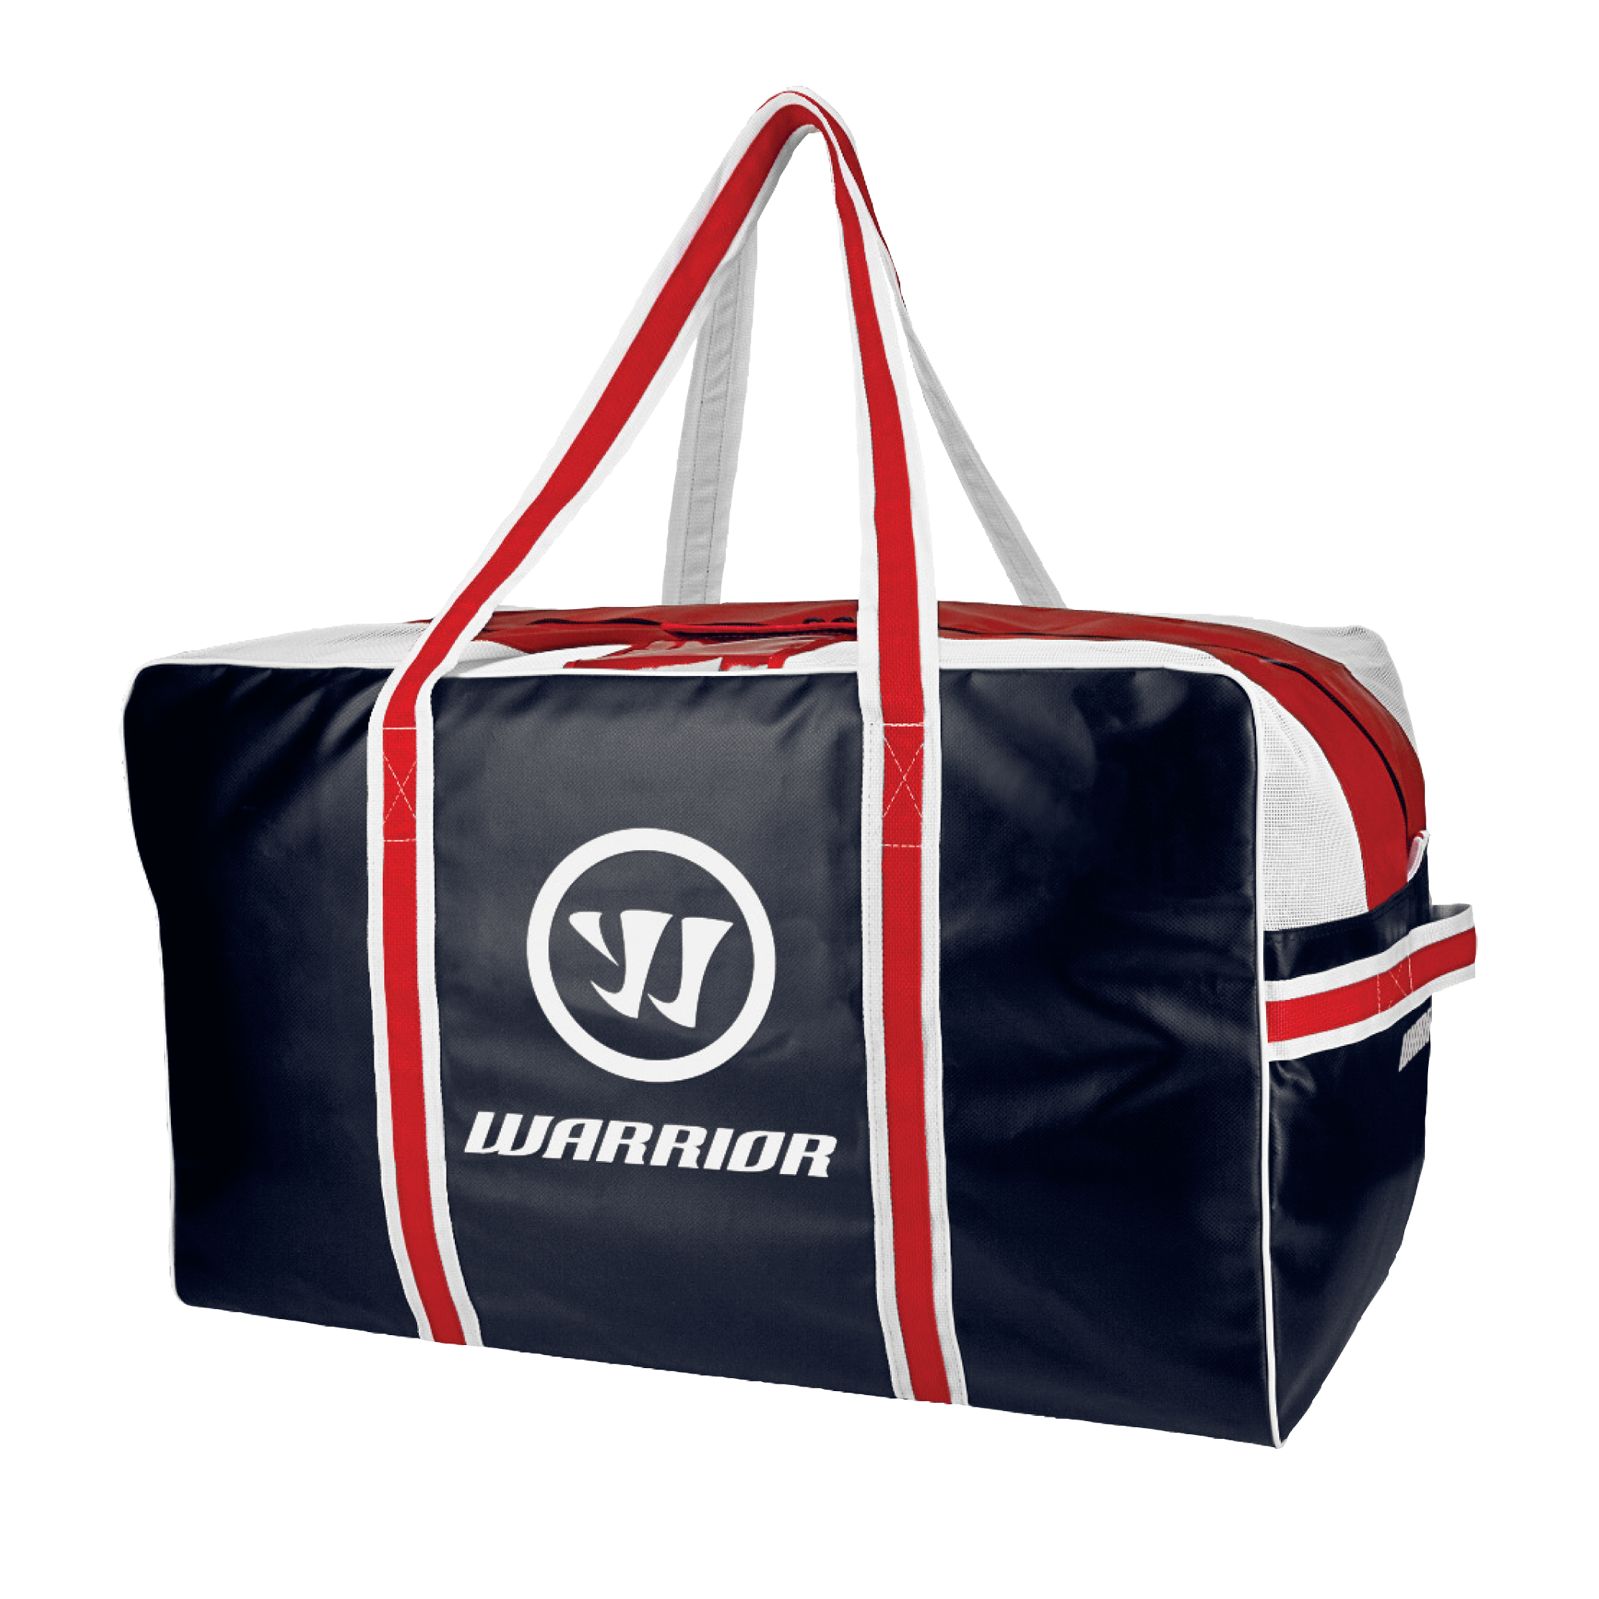 Pro Bag-Medium, Navy with Red image number 0